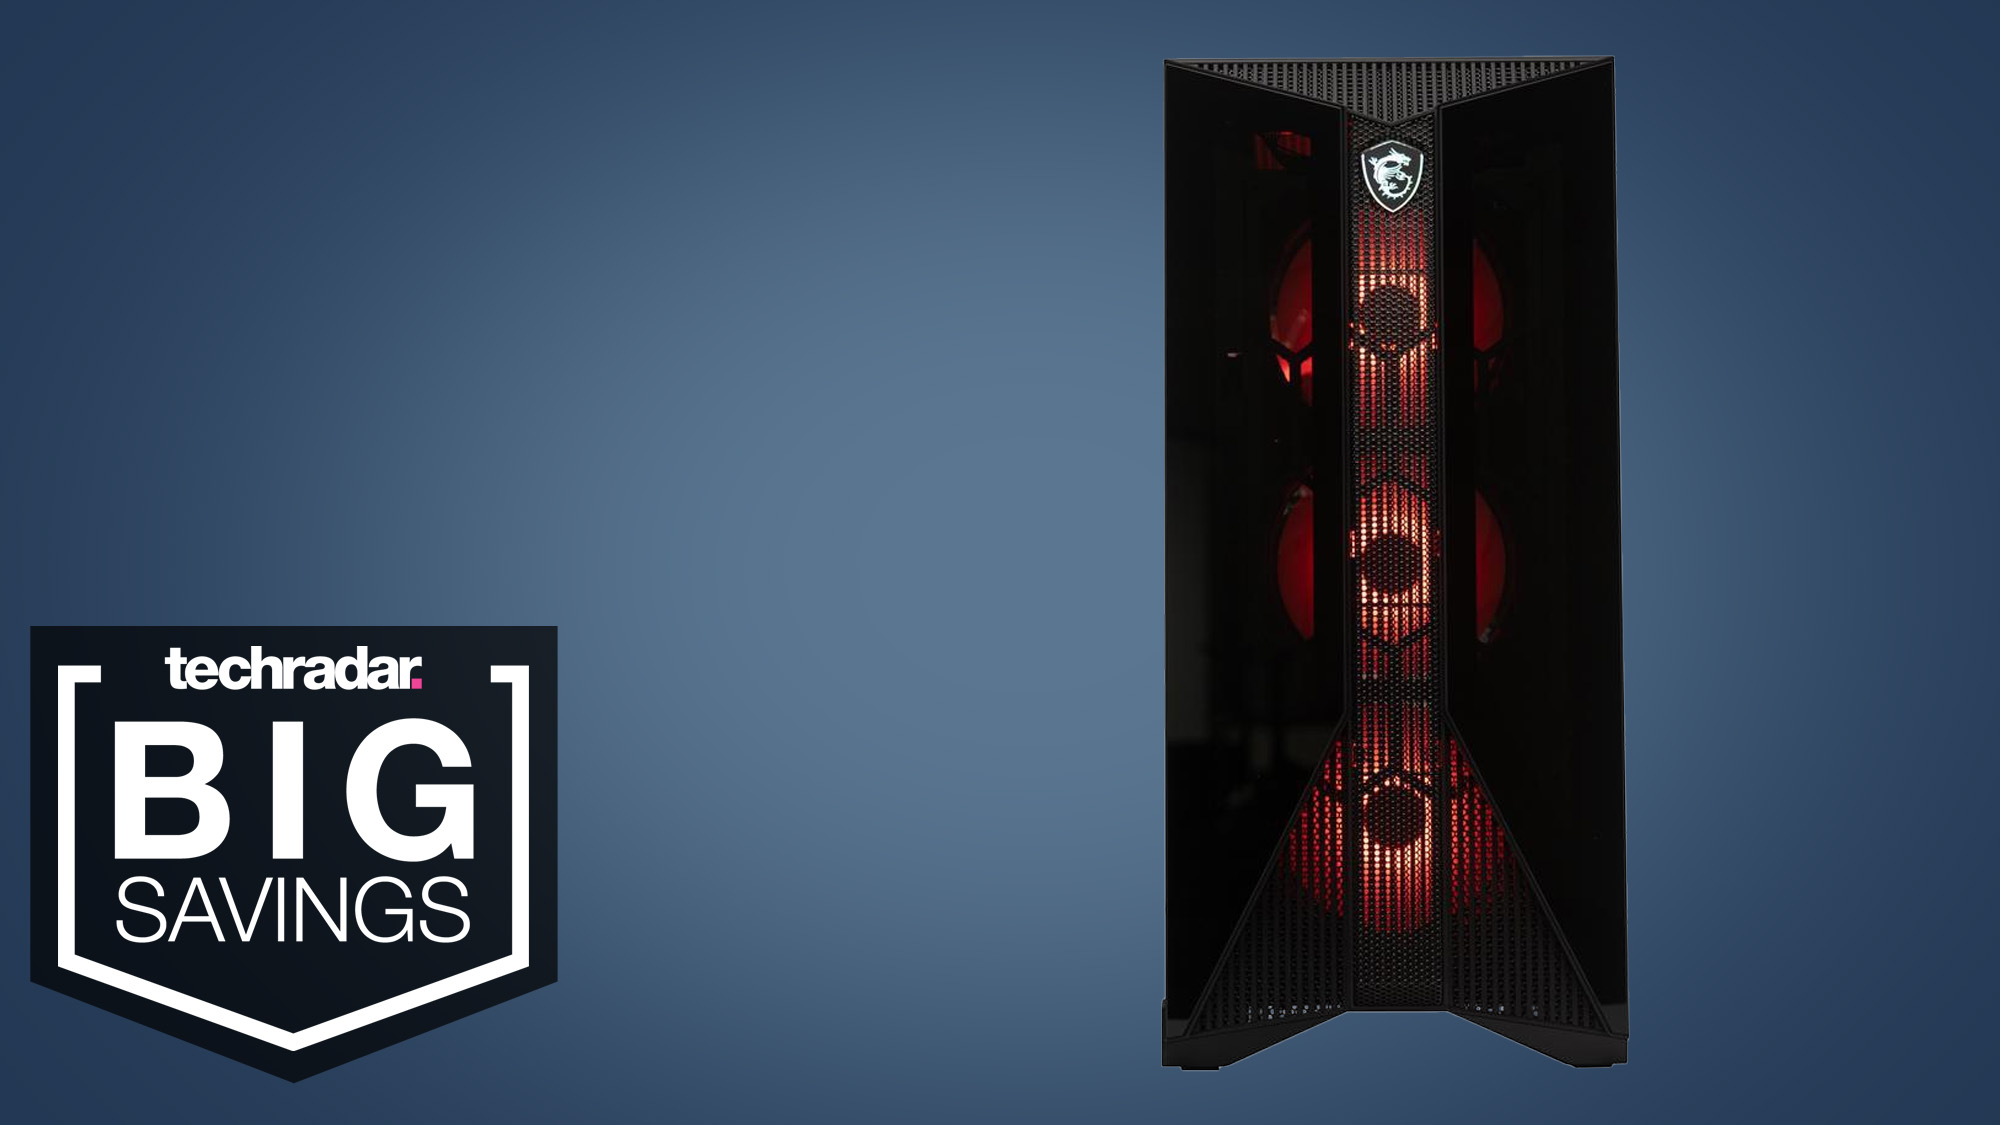 An MSI gaming PC against a blue background.